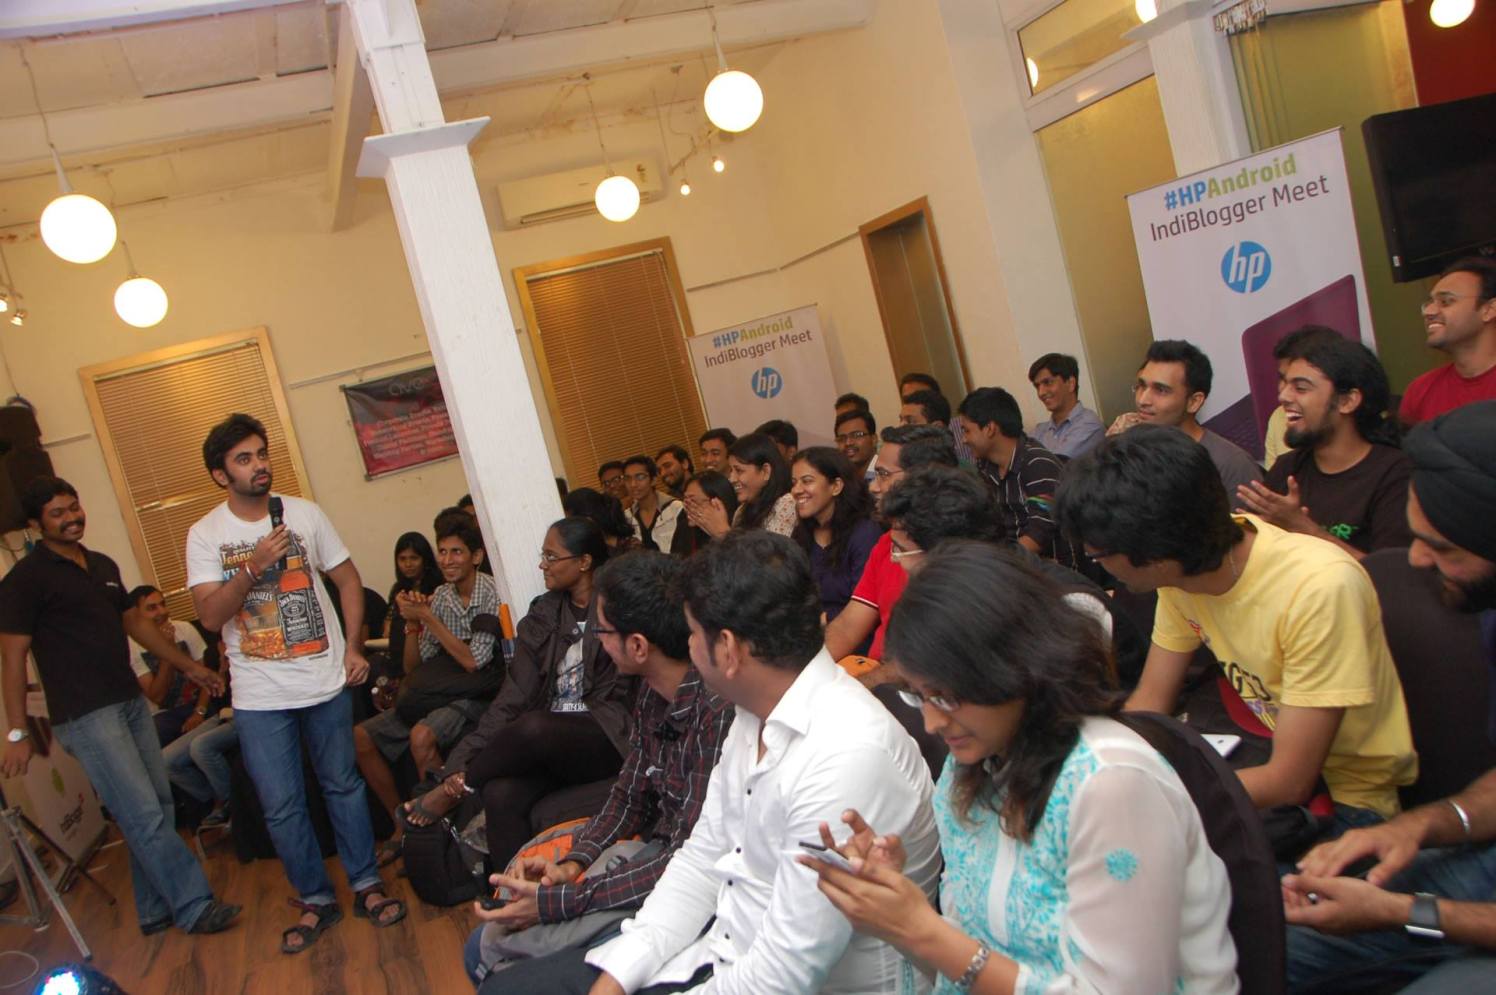 What made the ‘#HPAndroid Indiblogger Meet’ so awesome.